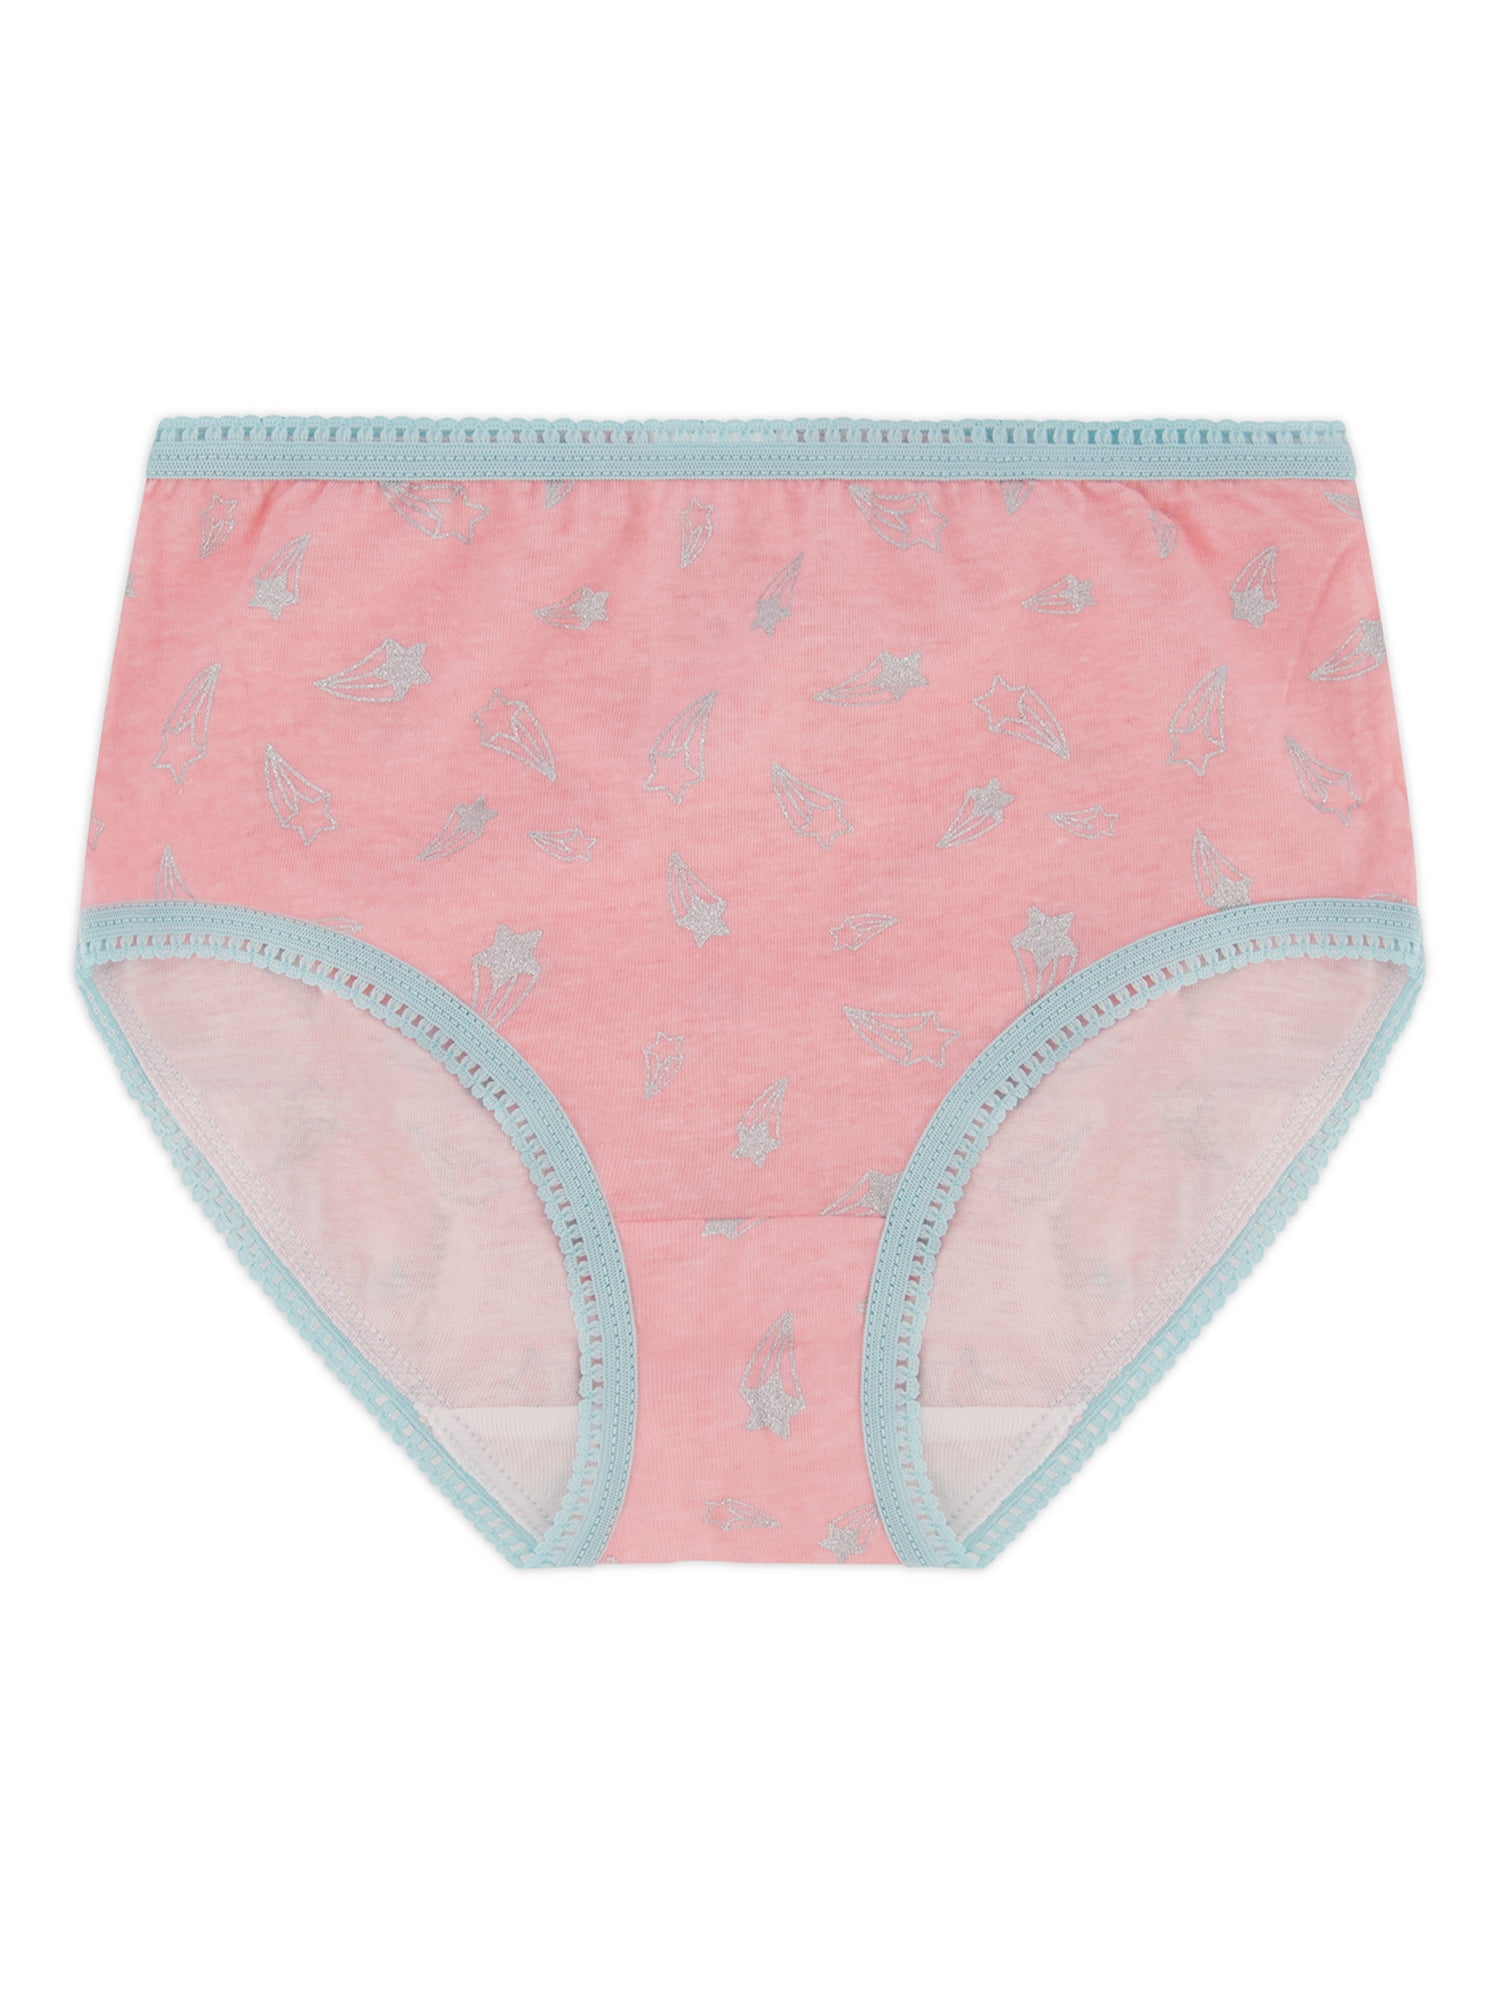 Ackermans - Get all the quality you deserve, at prices you can afford, with  100% cotton underwear for girls. We have 3-pack panties for girls, ages  2-7, from 39.95, and girls, ages